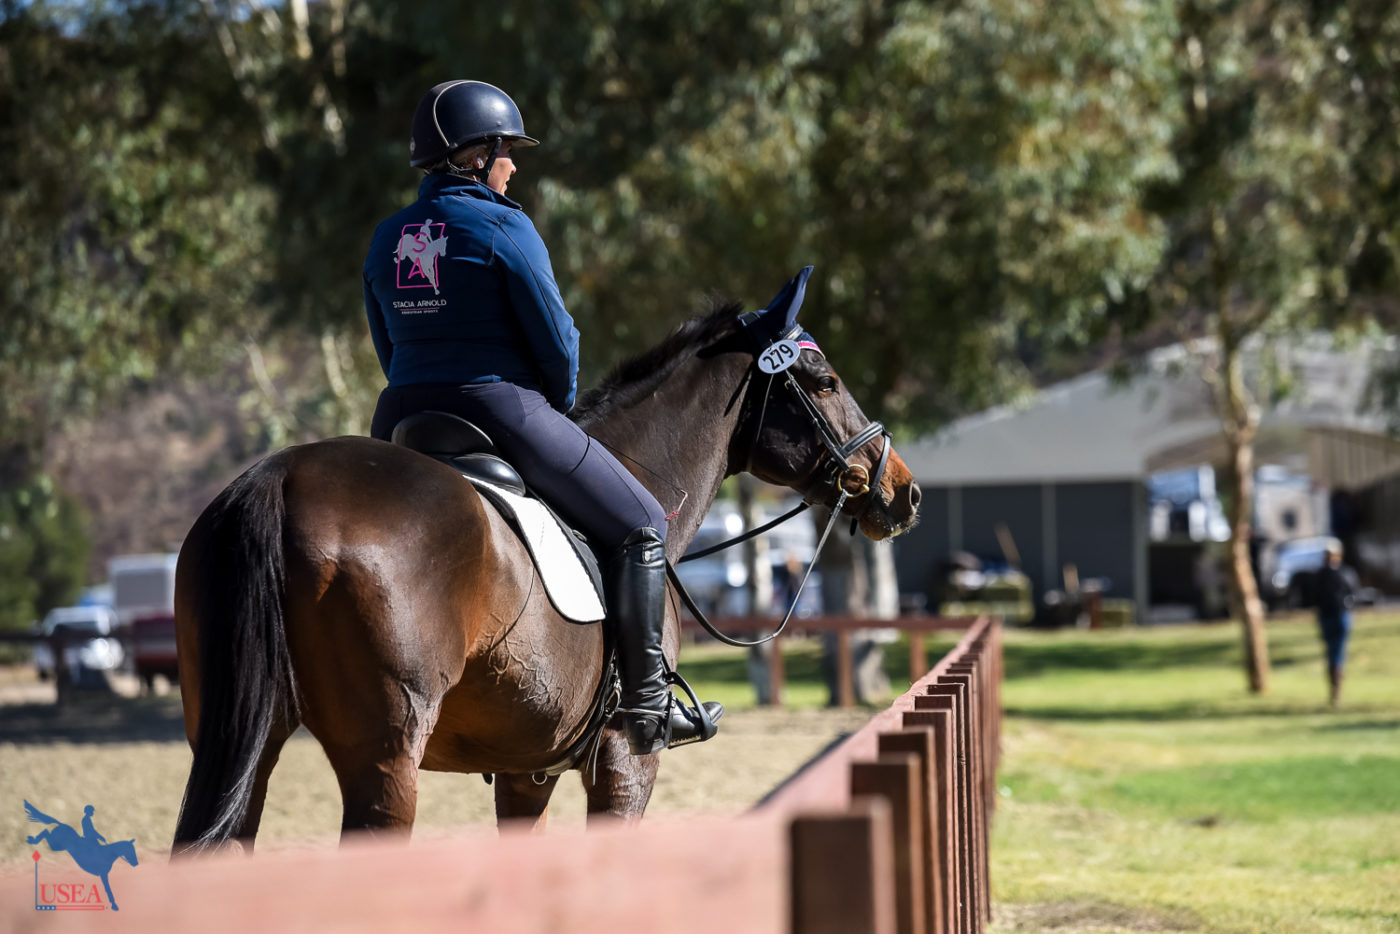 "Hey, what's that over there?" USEA/Jessica Duffy Photo.